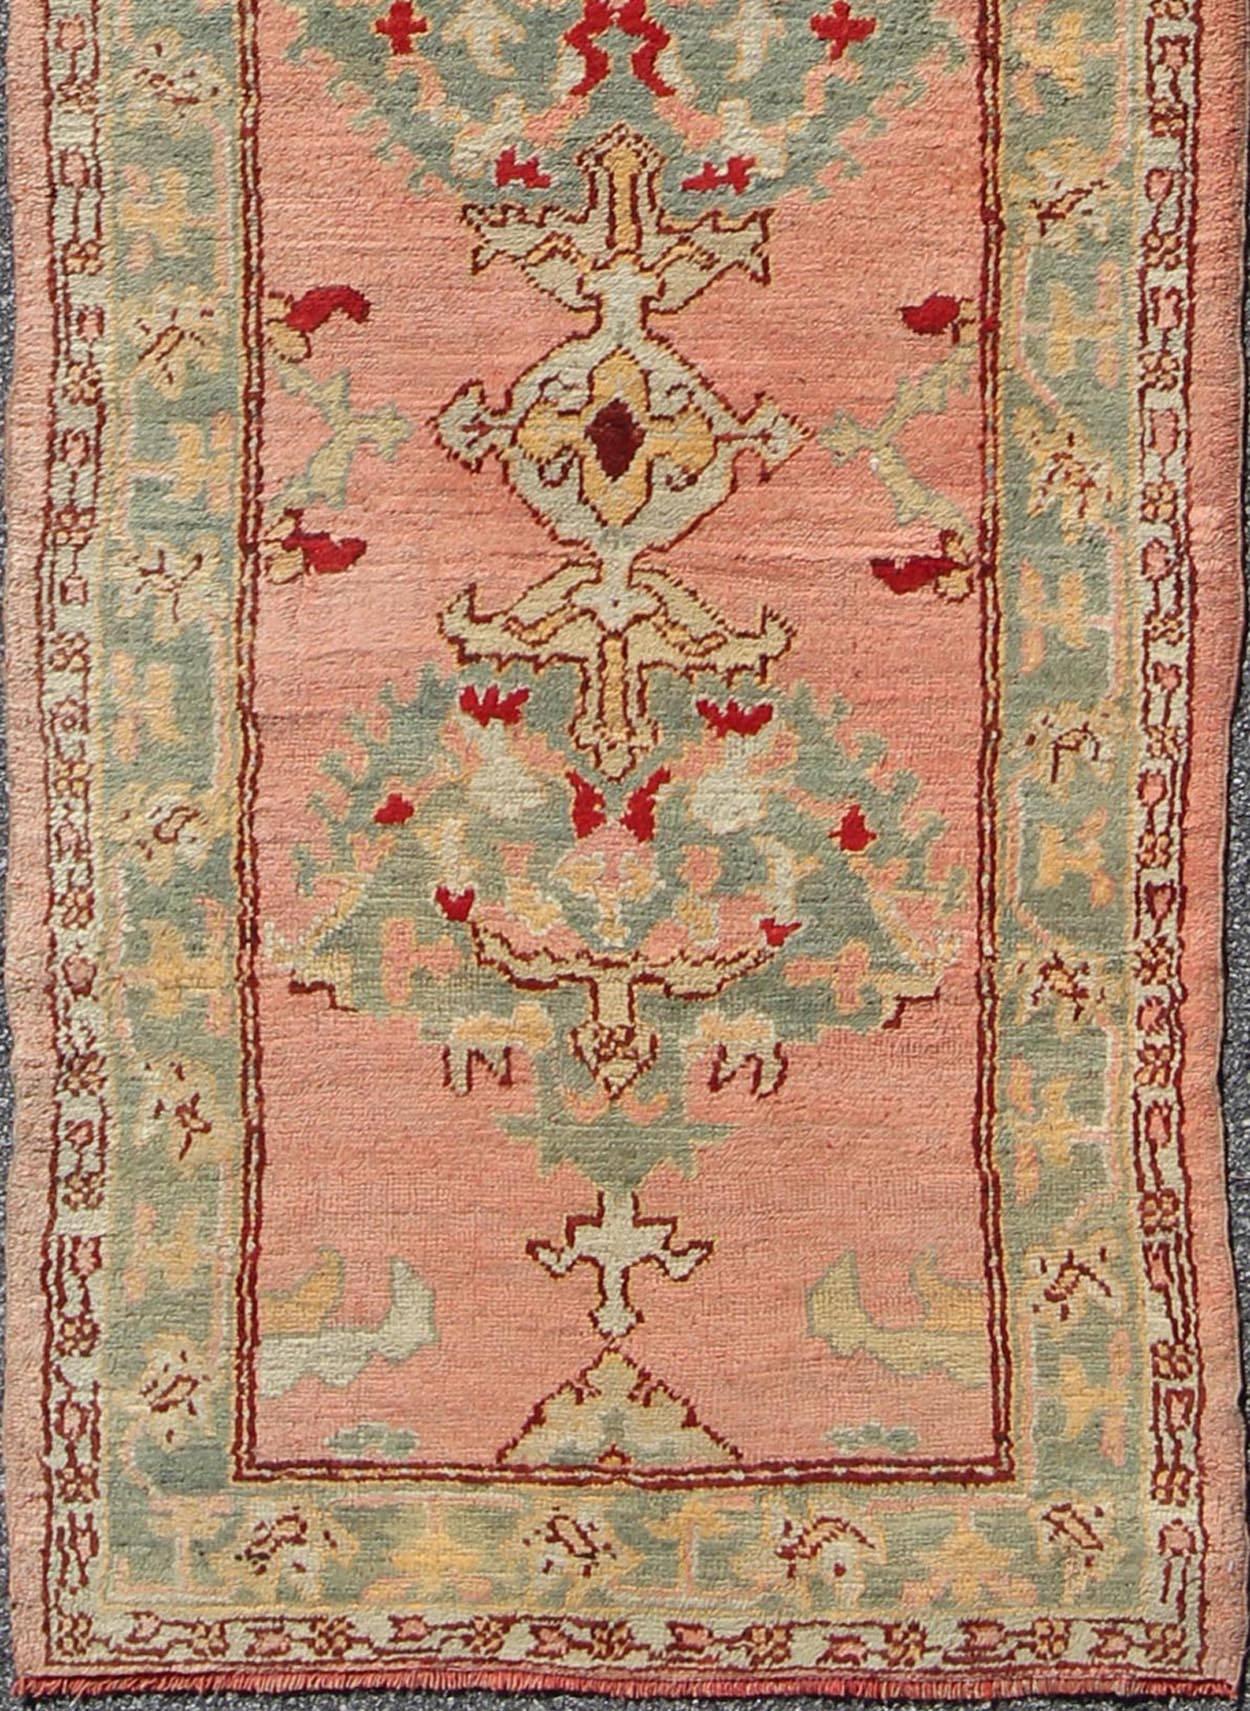 Salmon pink antique Turkish Oushak runner with stylized floral medallion design, rug h8-0402, country of origin / type: Turkey / Oushak, circa 1920

This vintage Turkish Oushak gallery runner (circa 1920) features a unique blend of colors and an